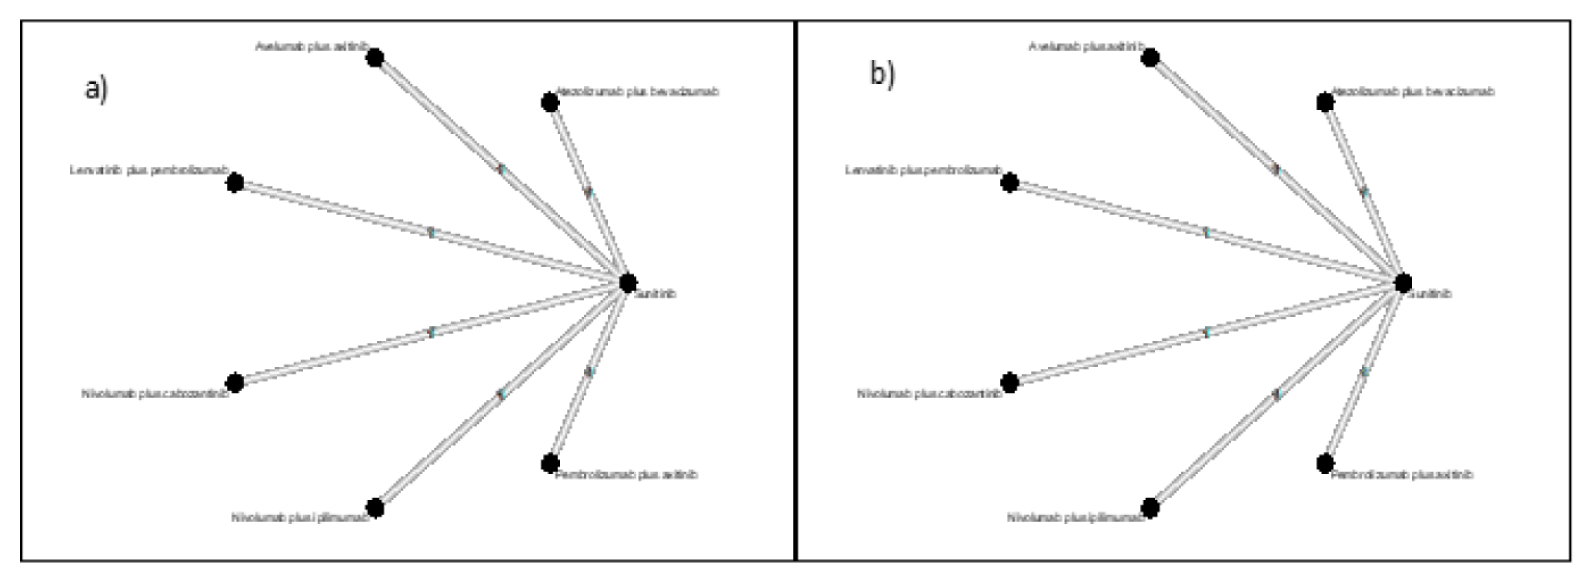 Network plots for overall survival and progression-free survival, in which nodes represent included interventions and the connections represent trials connecting the nodes.